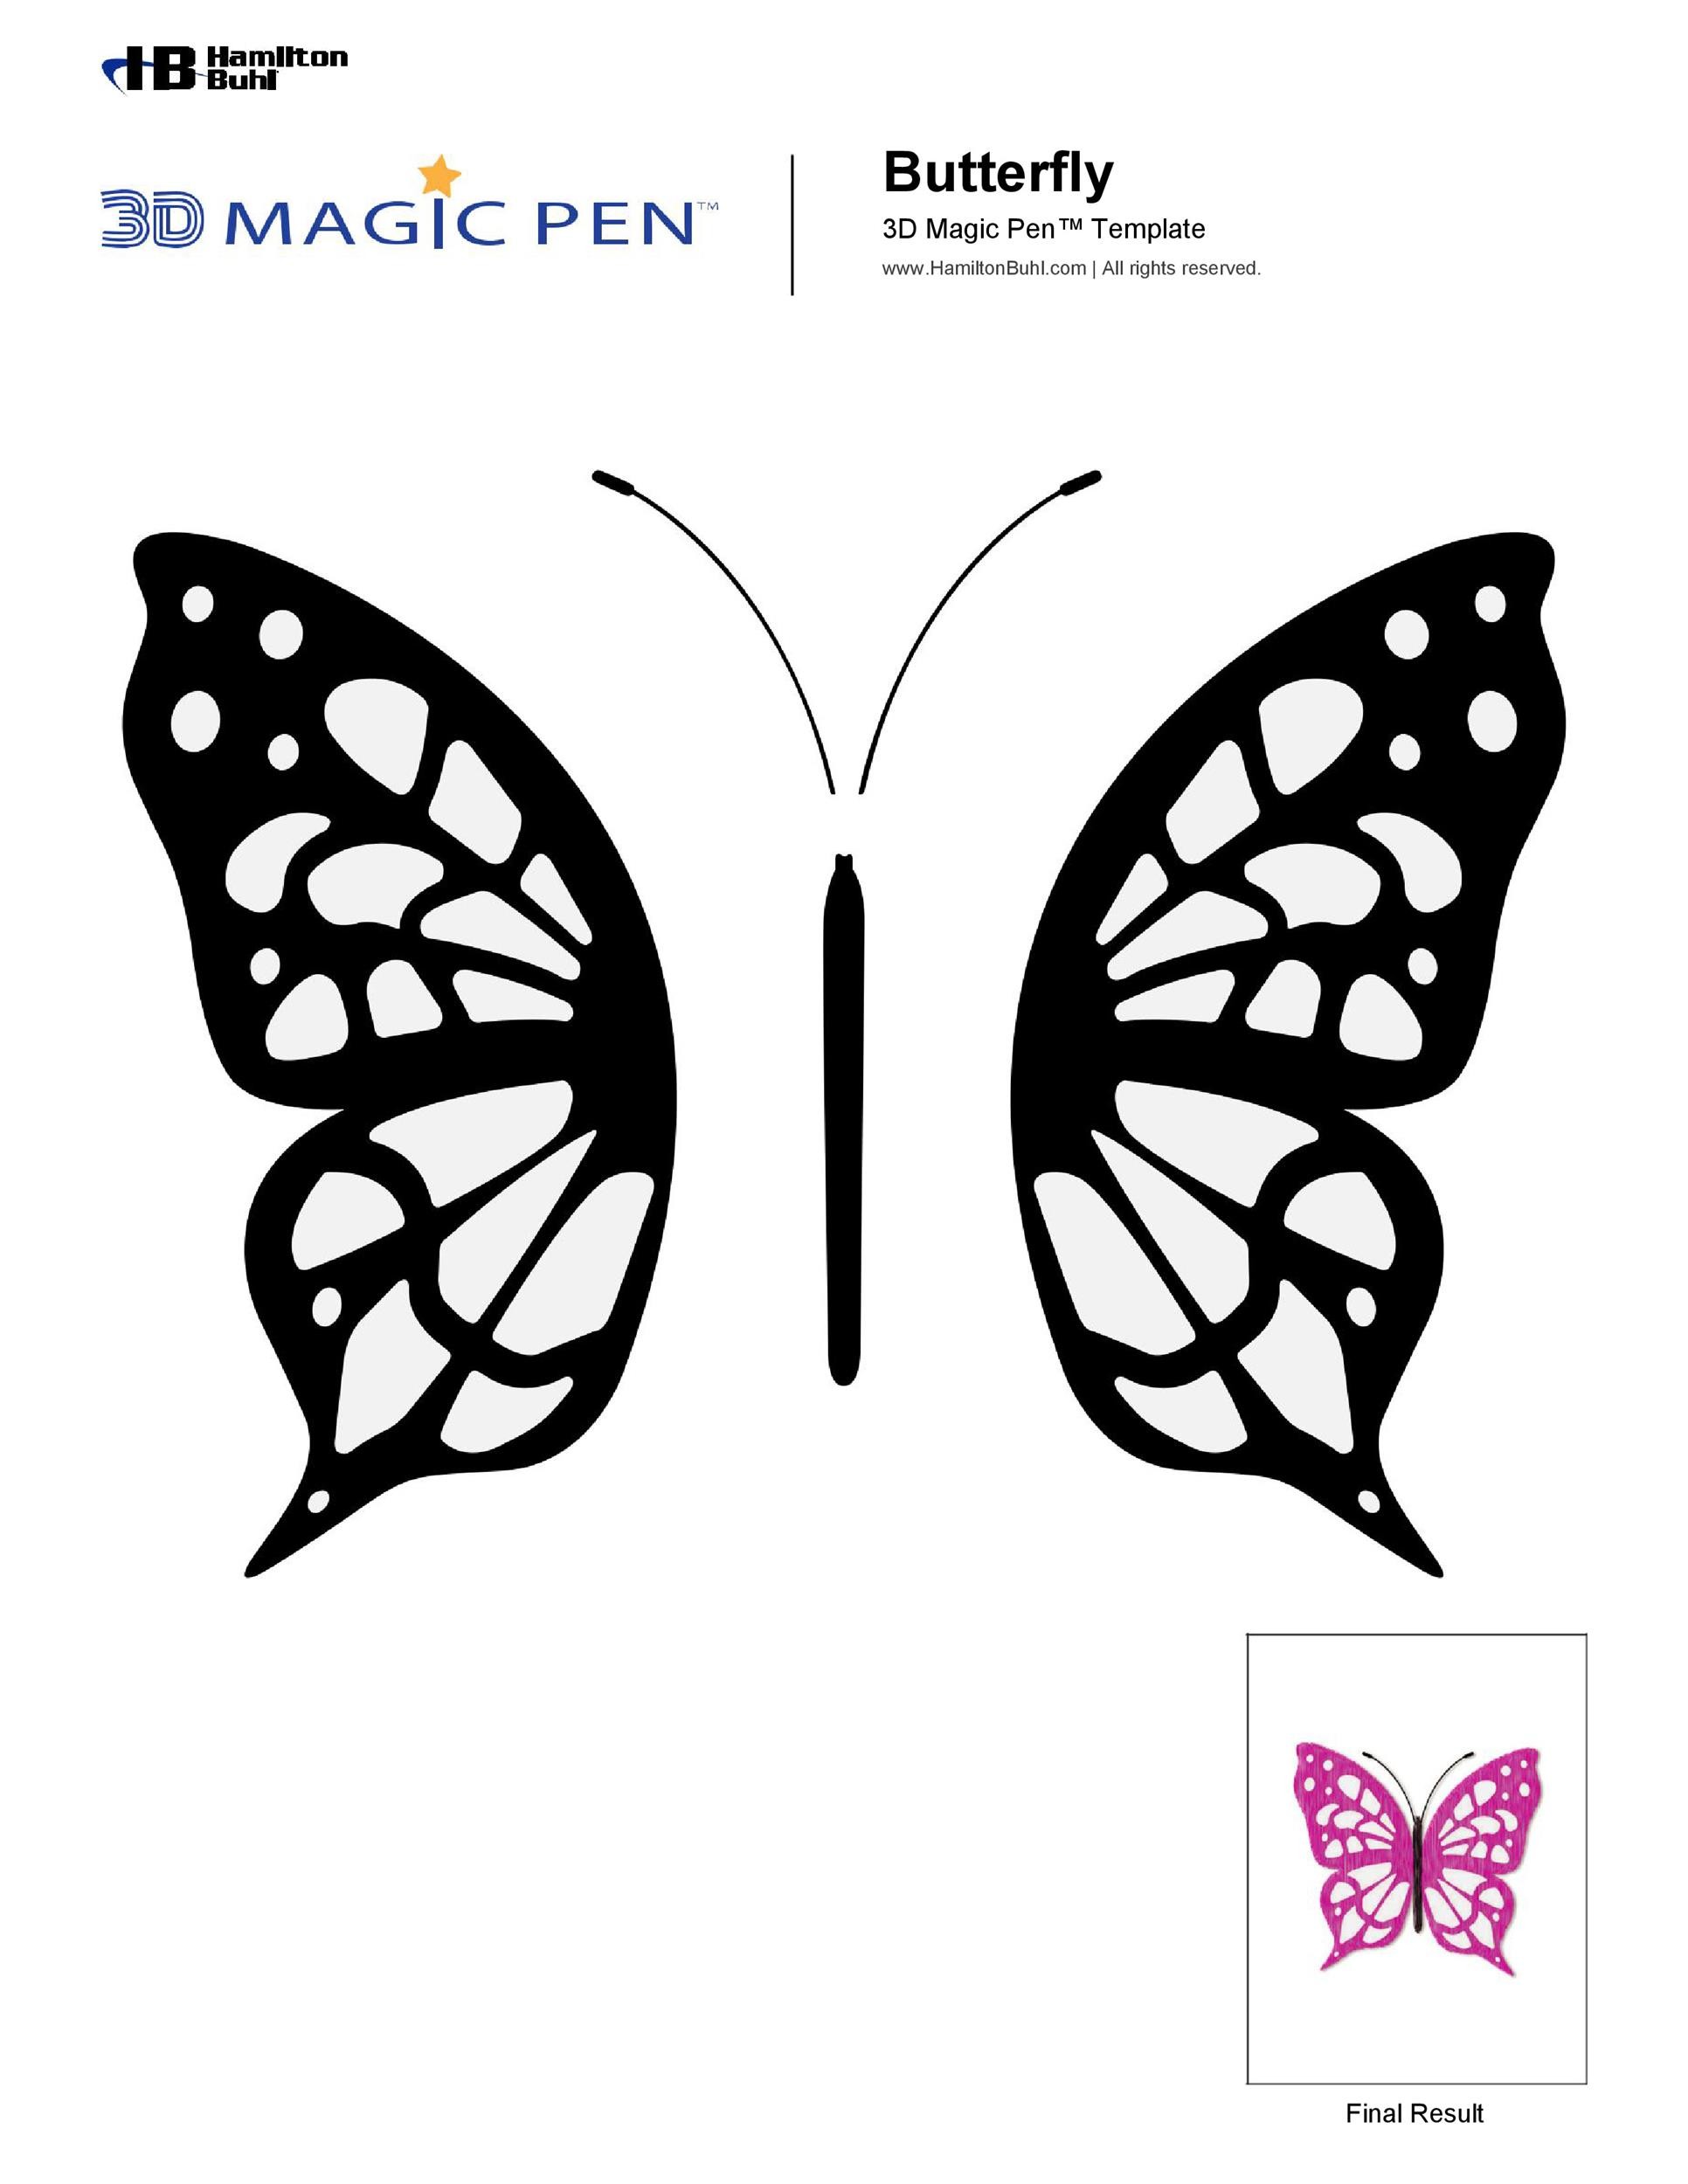 50 Printable Cut Out Butterfly Templates Á Templatelab You can download the papercraft model tem. 50 printable cut out butterfly